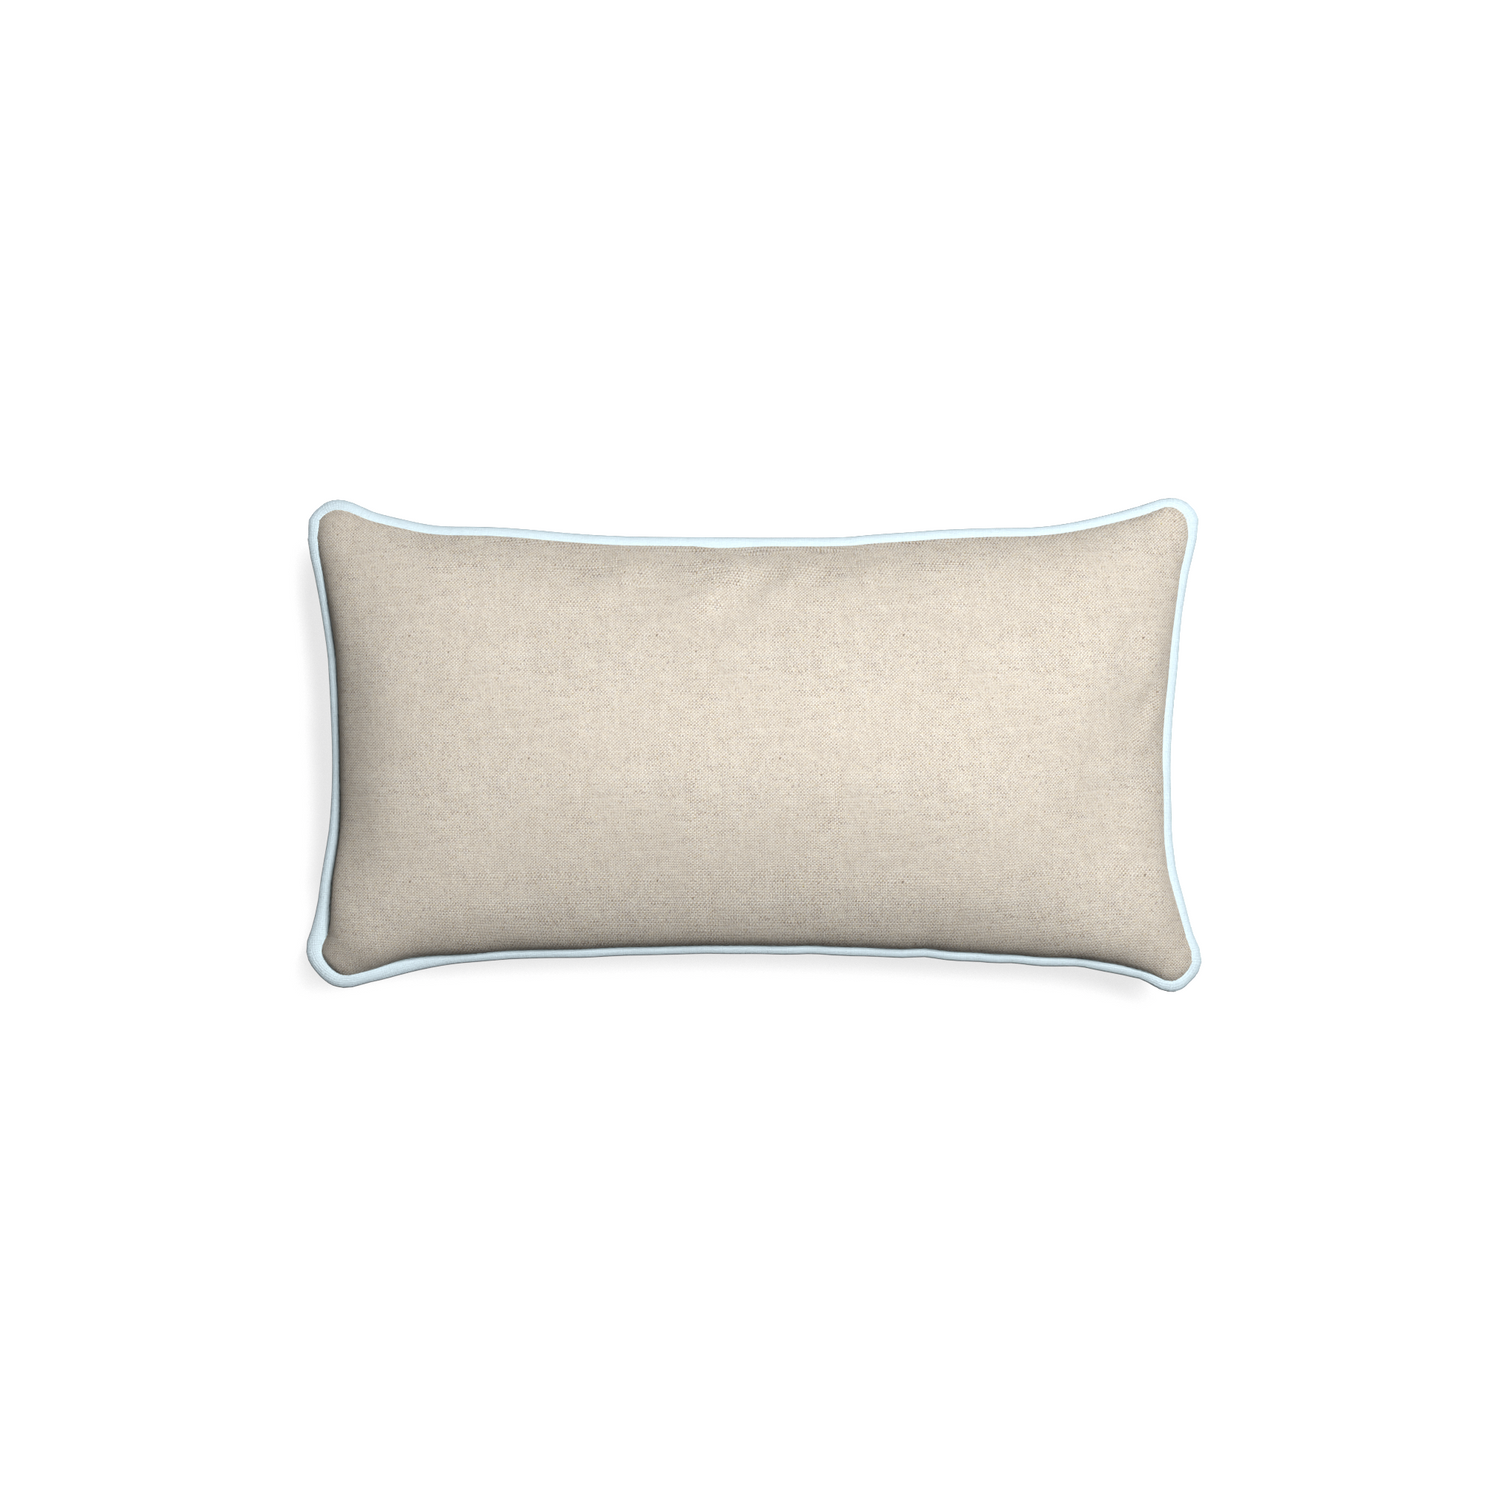 Petite-lumbar oat custom light brownpillow with powder piping on white background